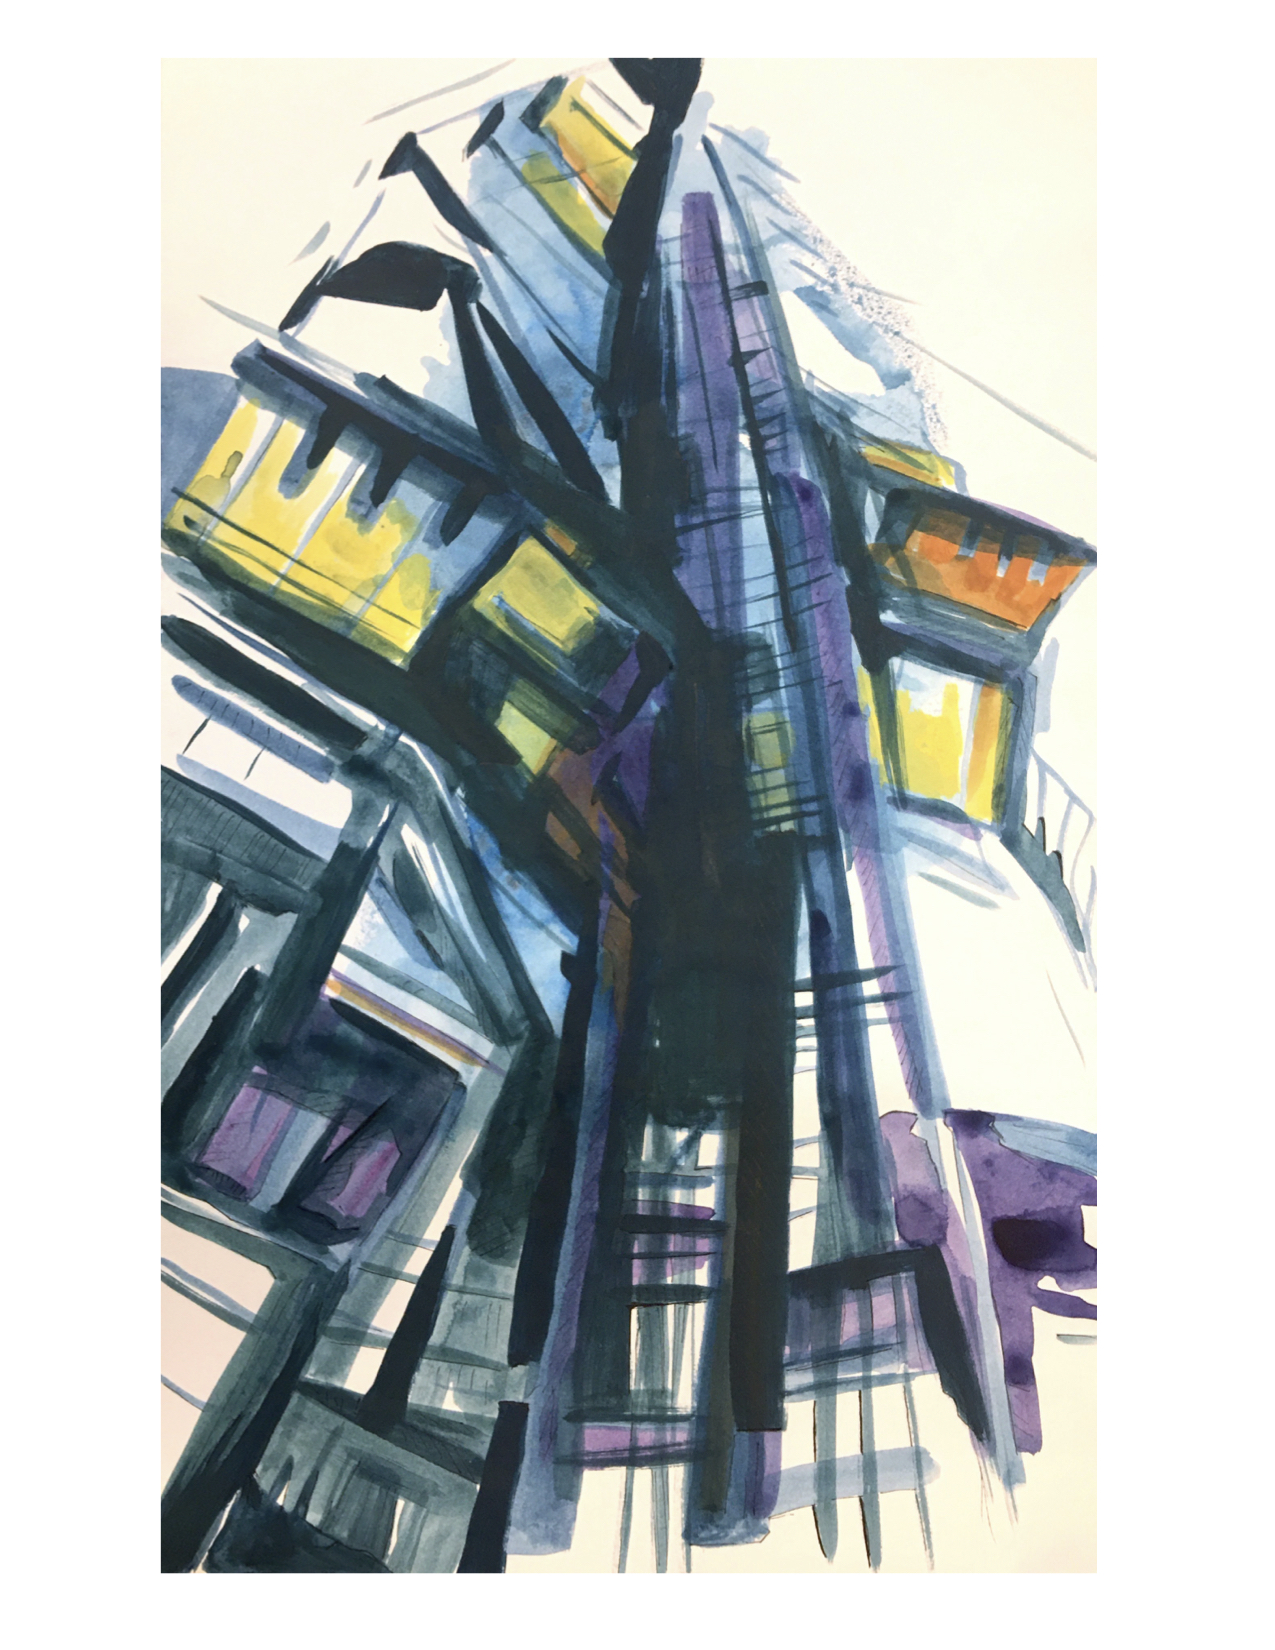 The High-rise, acrylic on paper, 21x13 inches, 2020